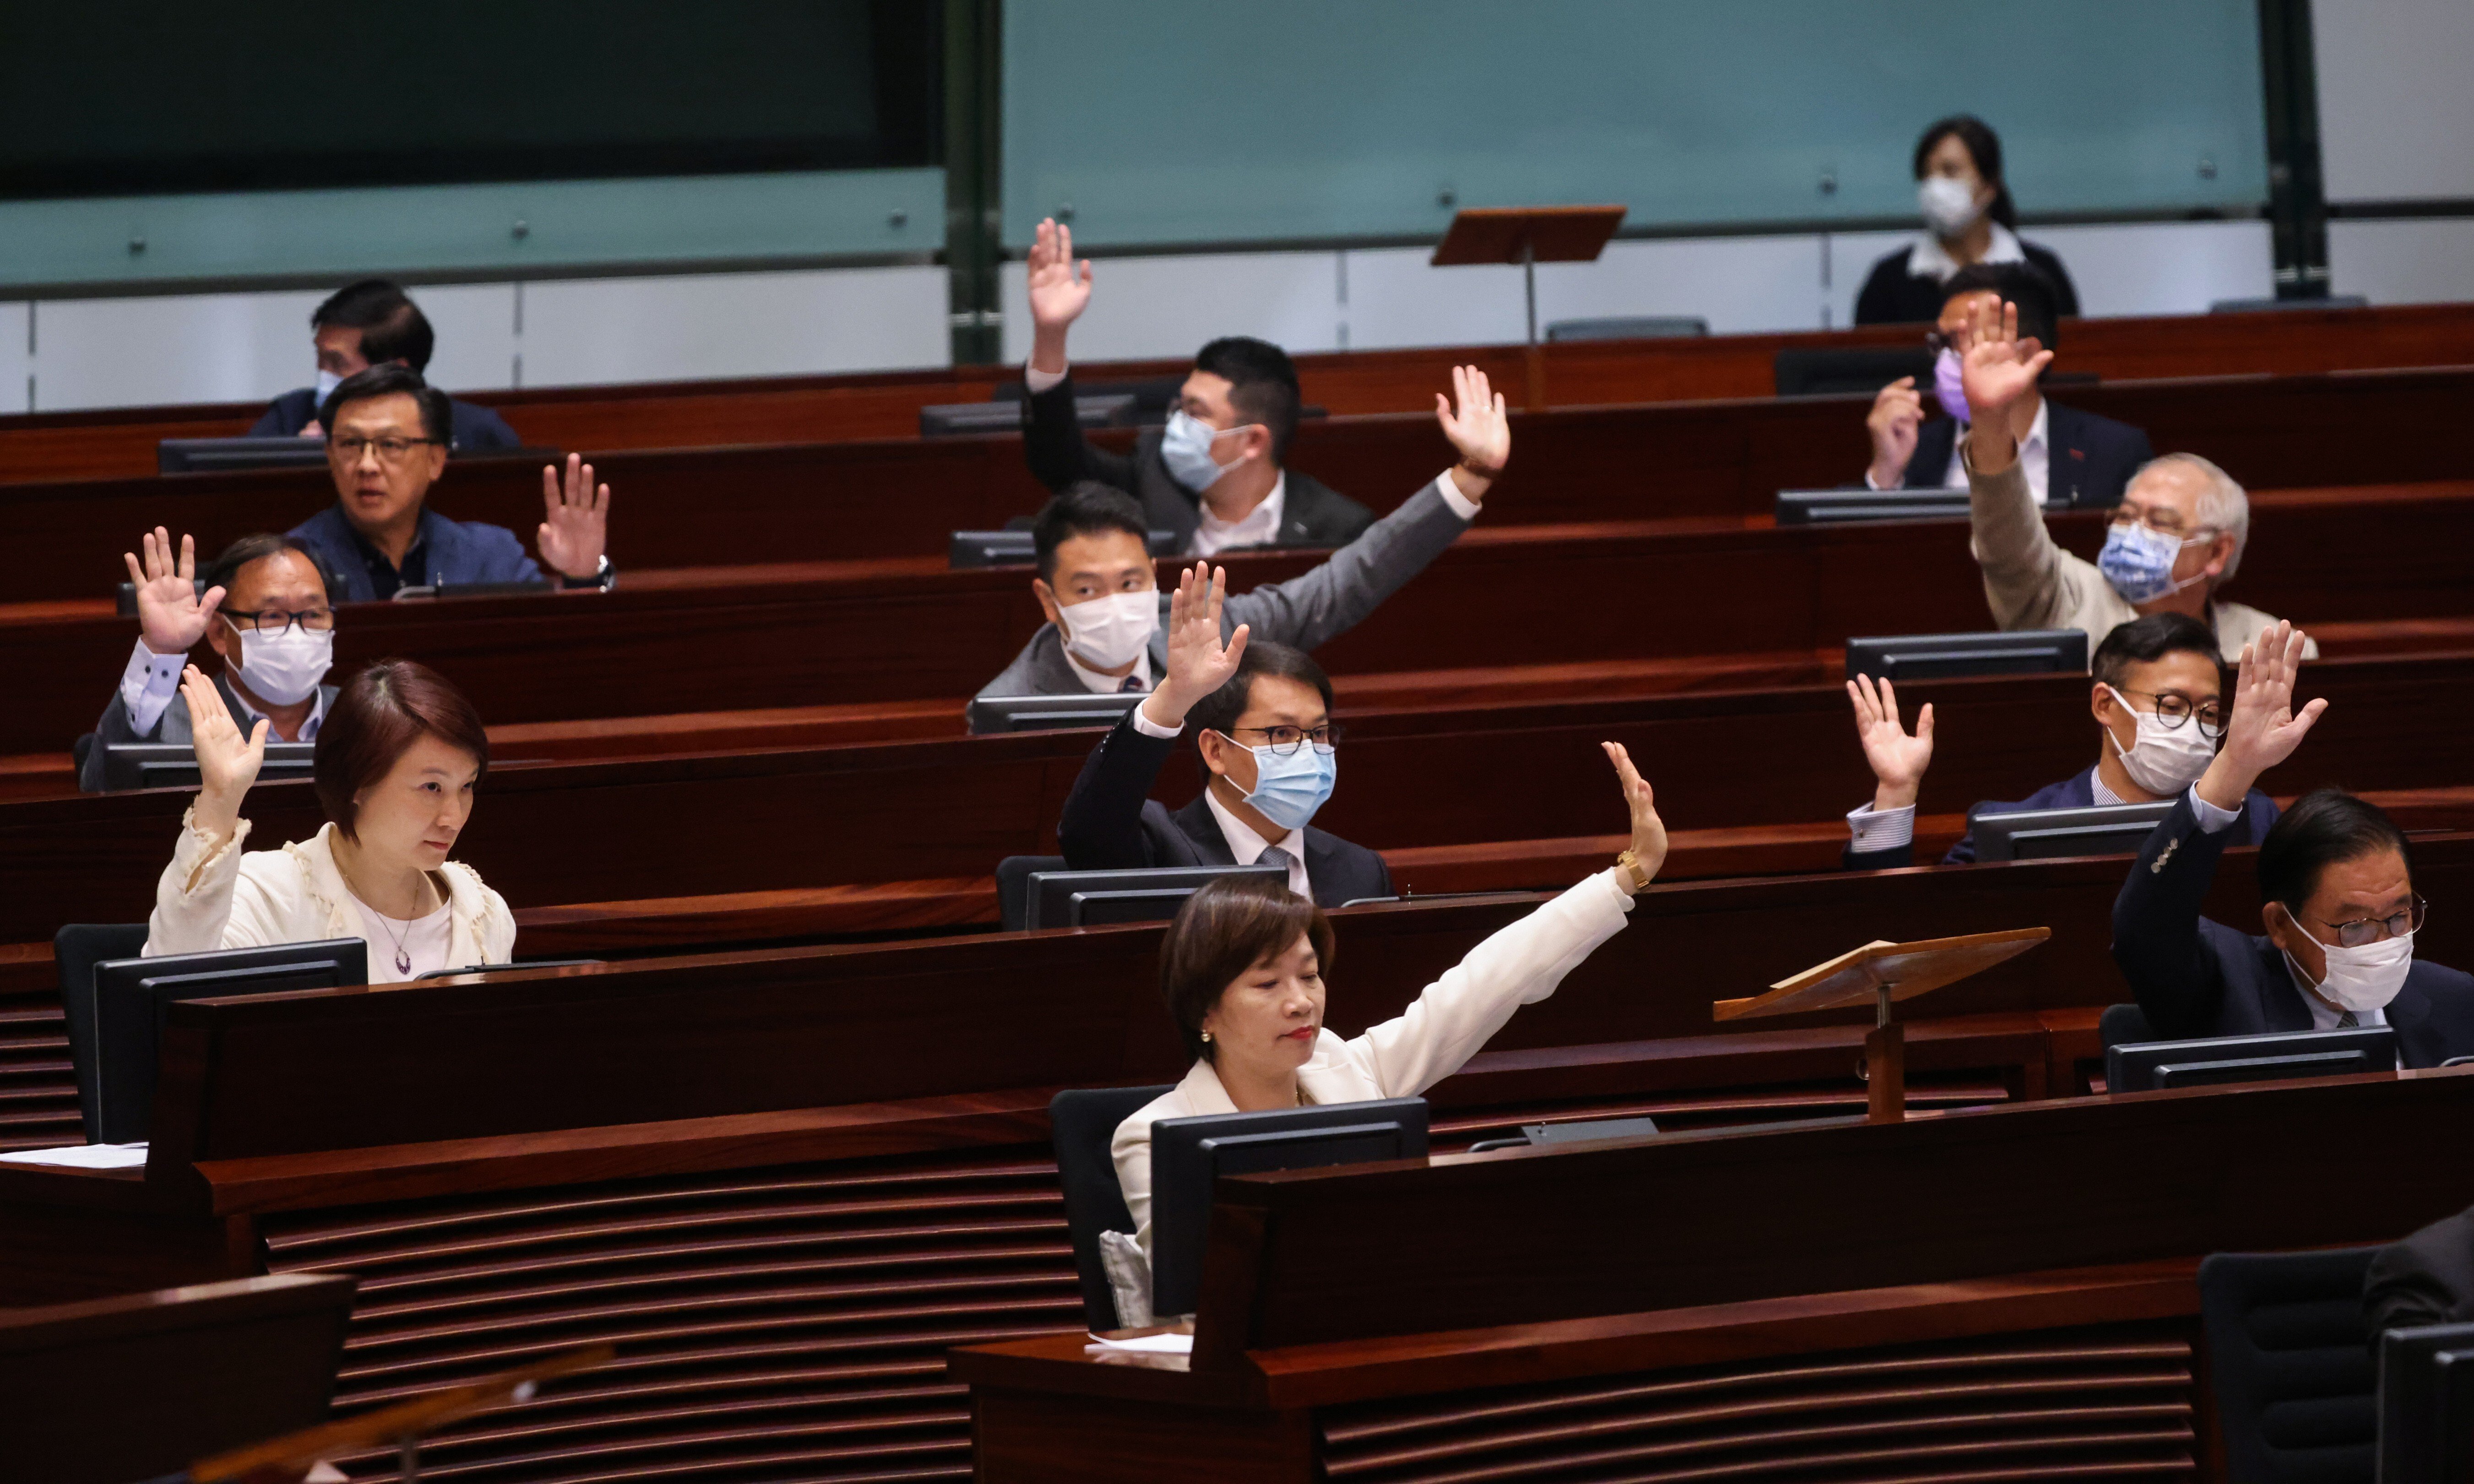 Legislative Council members approve the bill on Thursday revamping the city’s electoral system. Photo: K. Y. Cheng